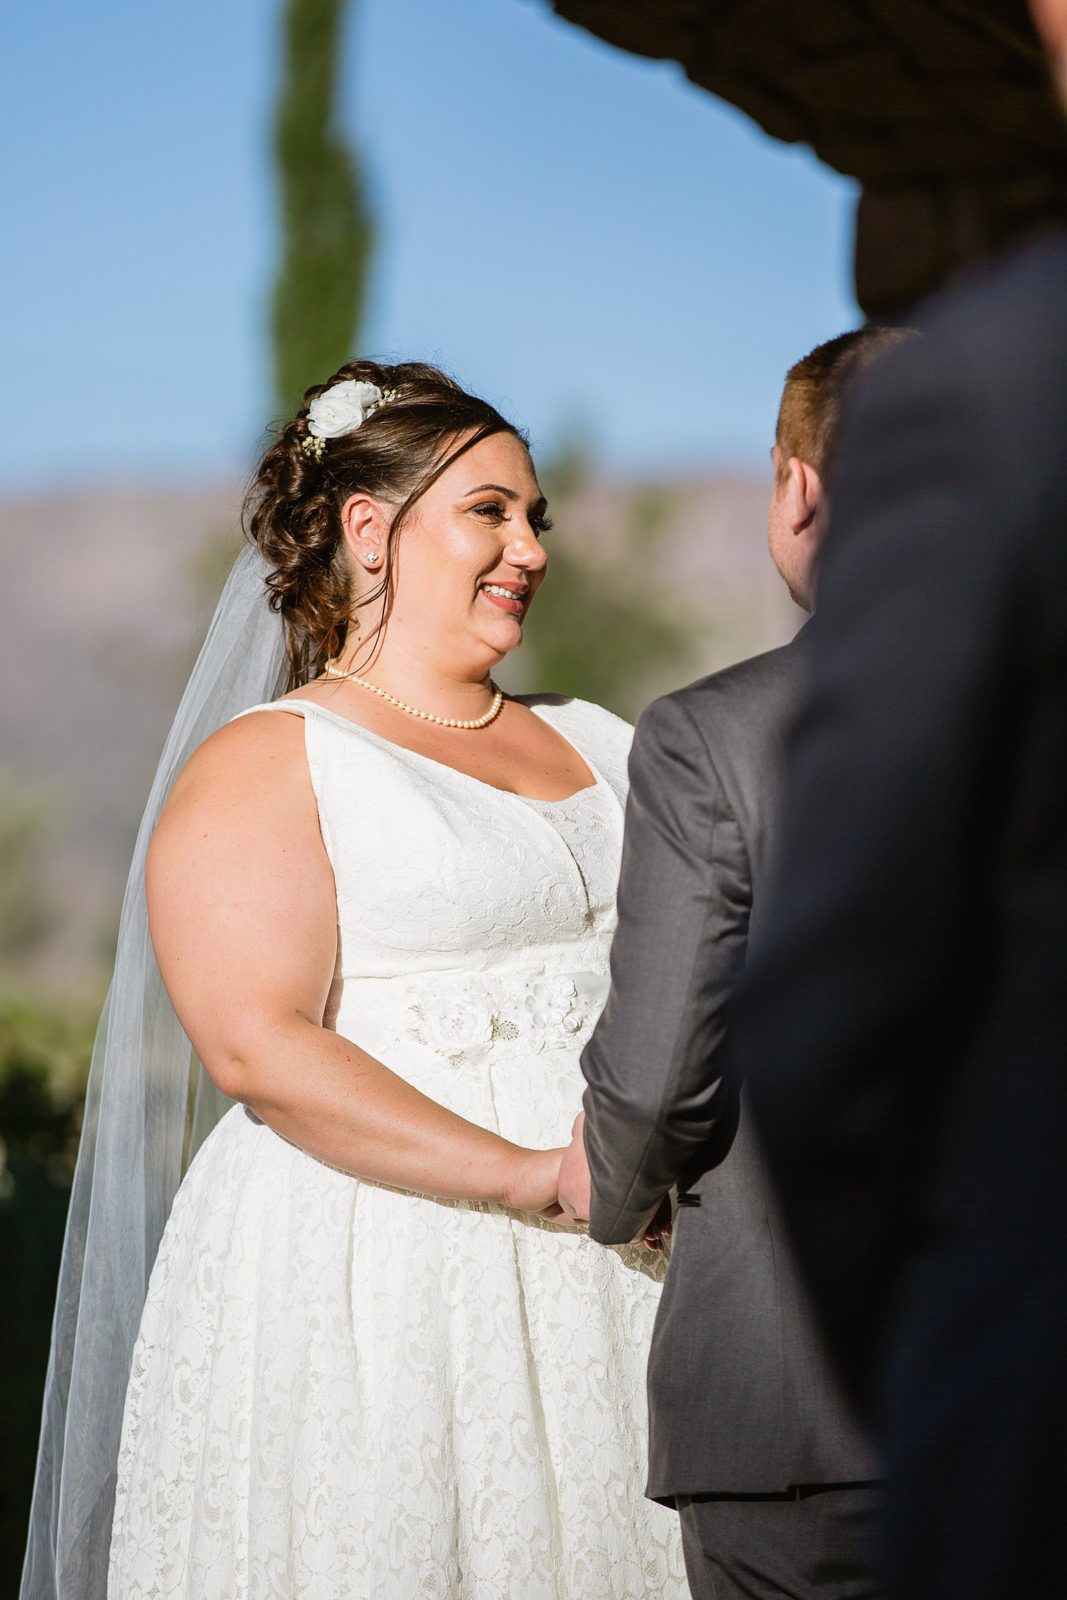 Bride looking at her groom during their wedding ceremony at Superstition Manor by Mesa wedding photographer PMA Photography.